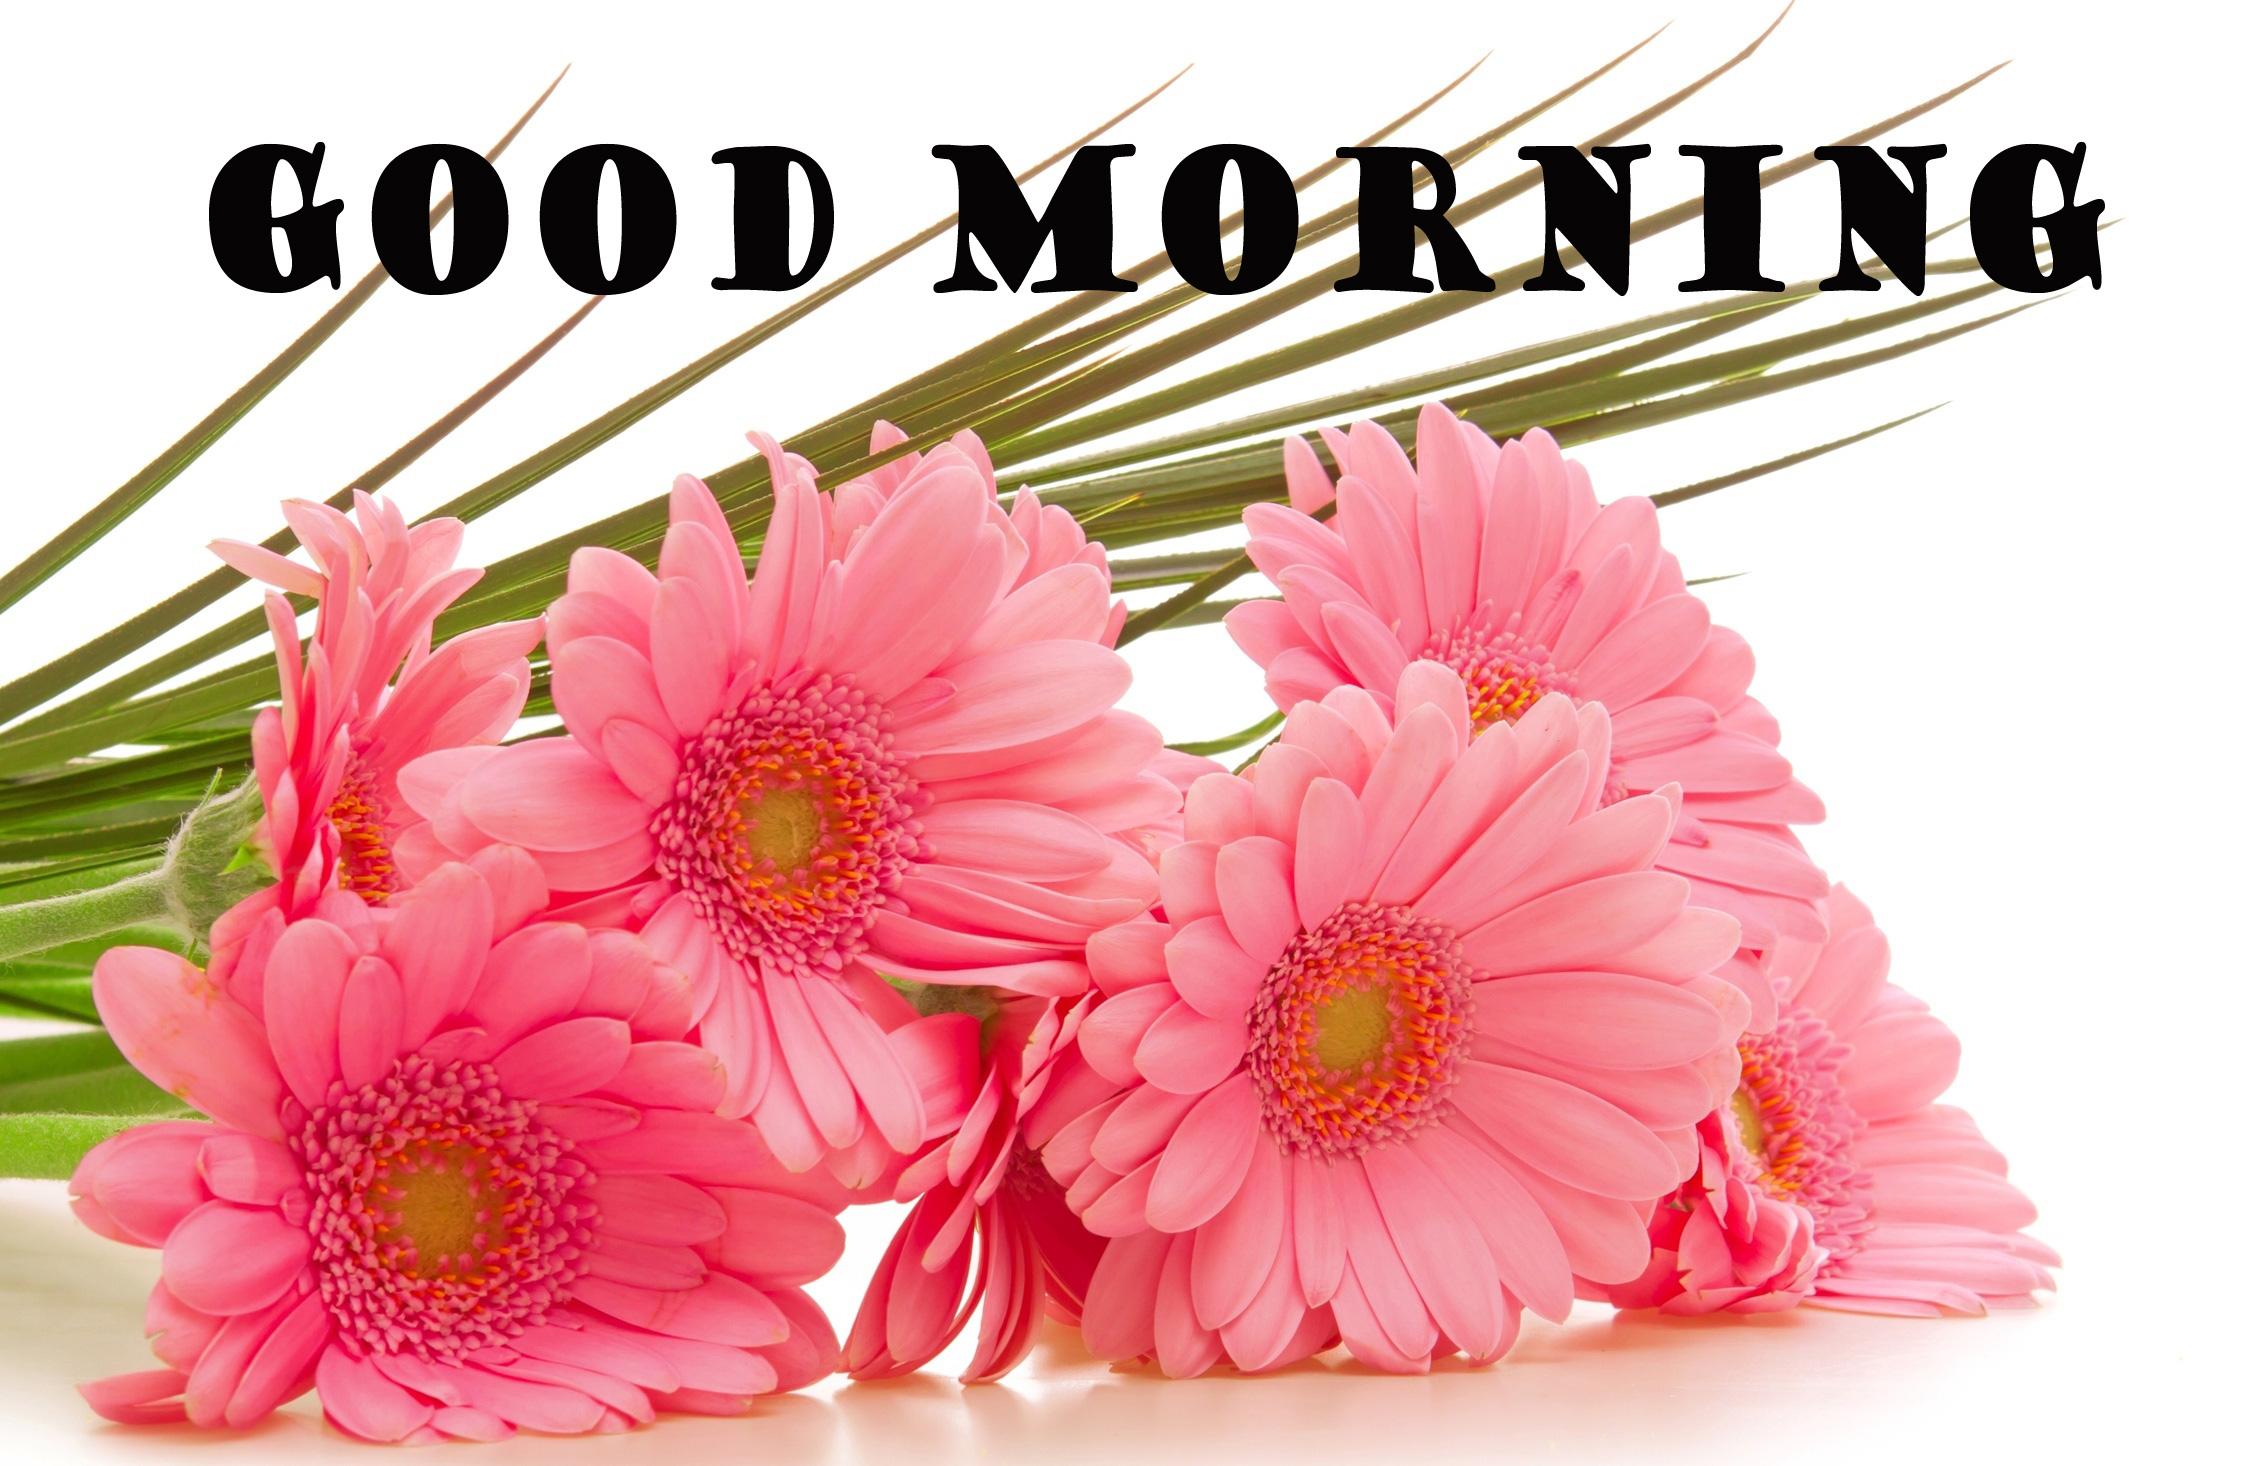 Good Morning Flowers Wallpaper Picture Image